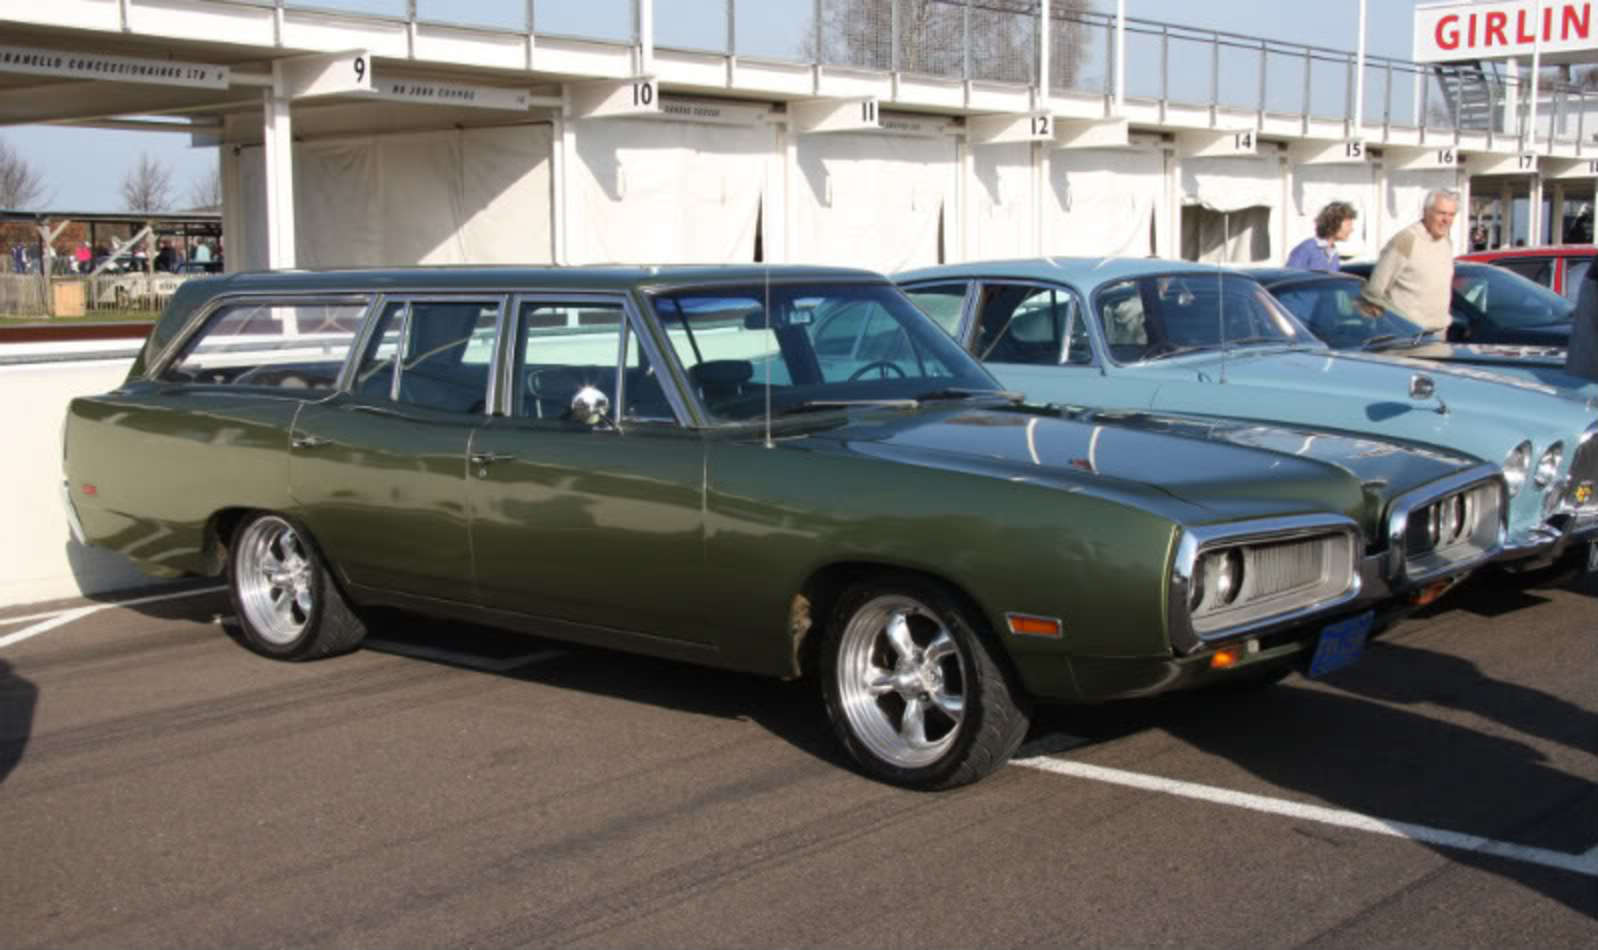 Re: 70 Dodge Coronet Wagon. This should be an interesting build.